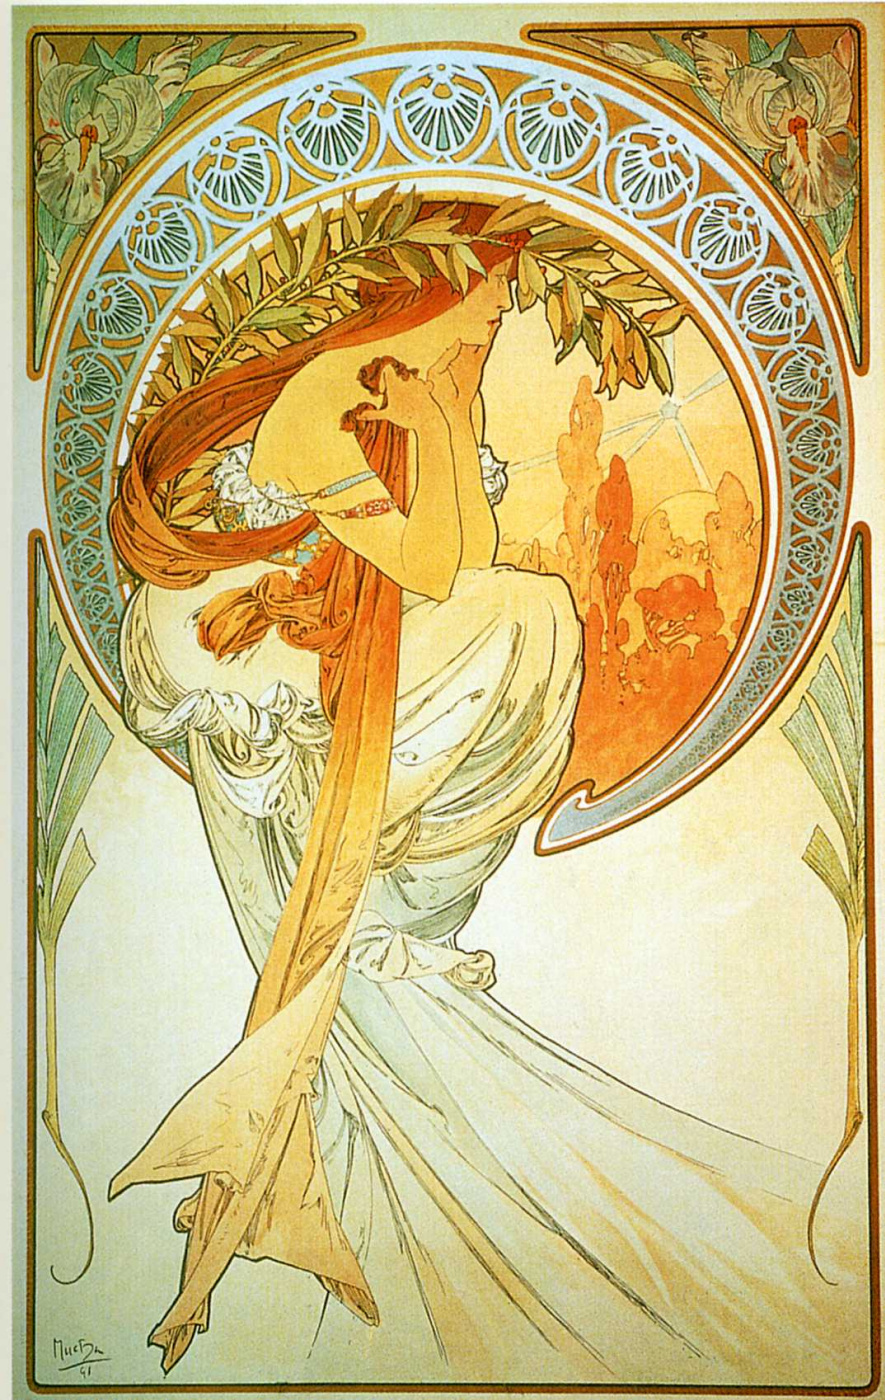 Alfonse Mucha. Poetry. From the series "Art"